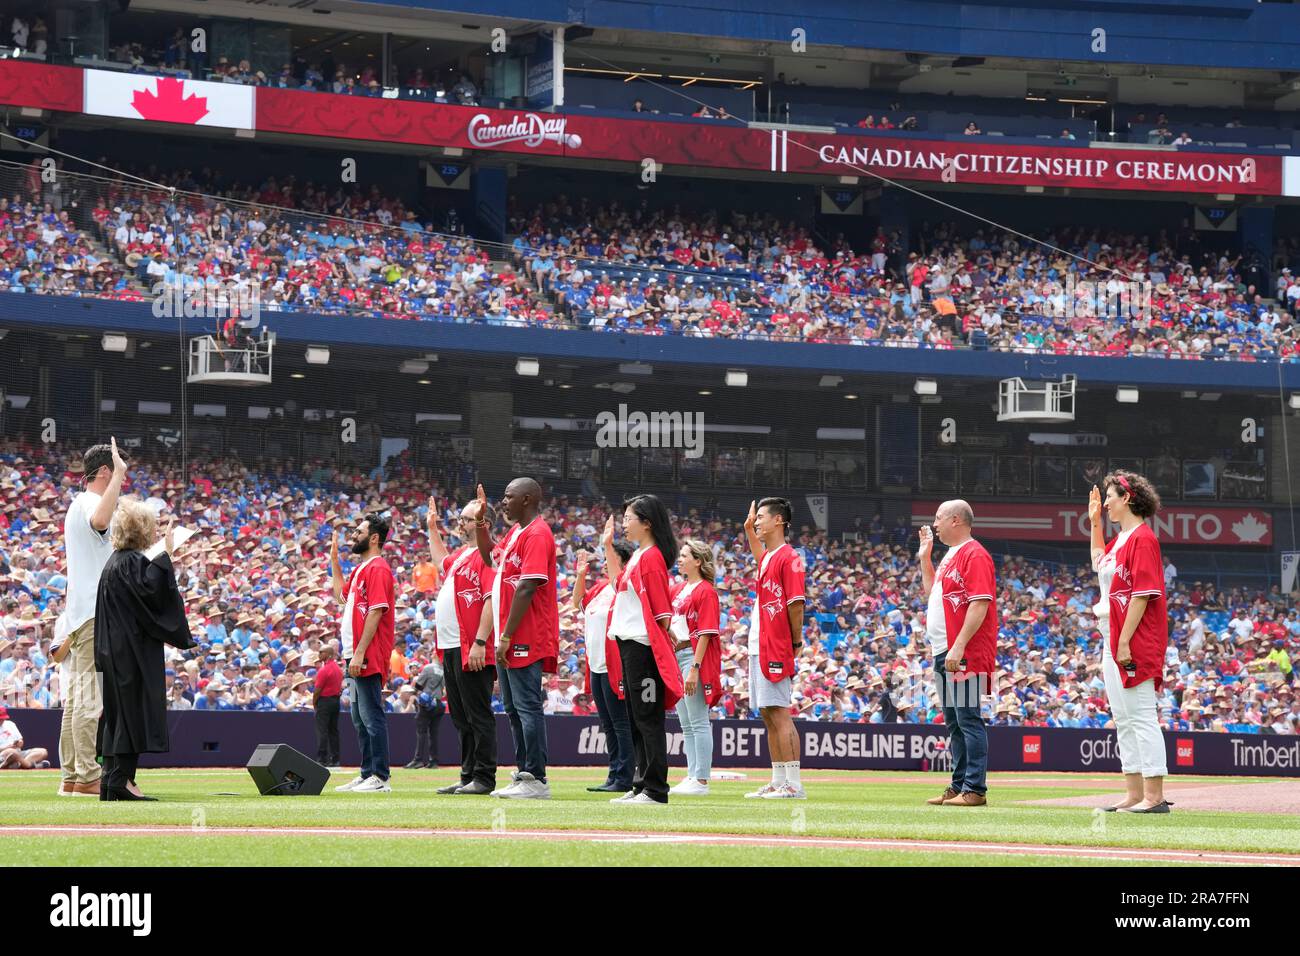 Toronto, Canada. 01st July, 2023. People take part in a Canada Day  citizenship ceremony before the start of MLB AL baseball action between the  Toronto Blue Jays and the Boston Red Sox